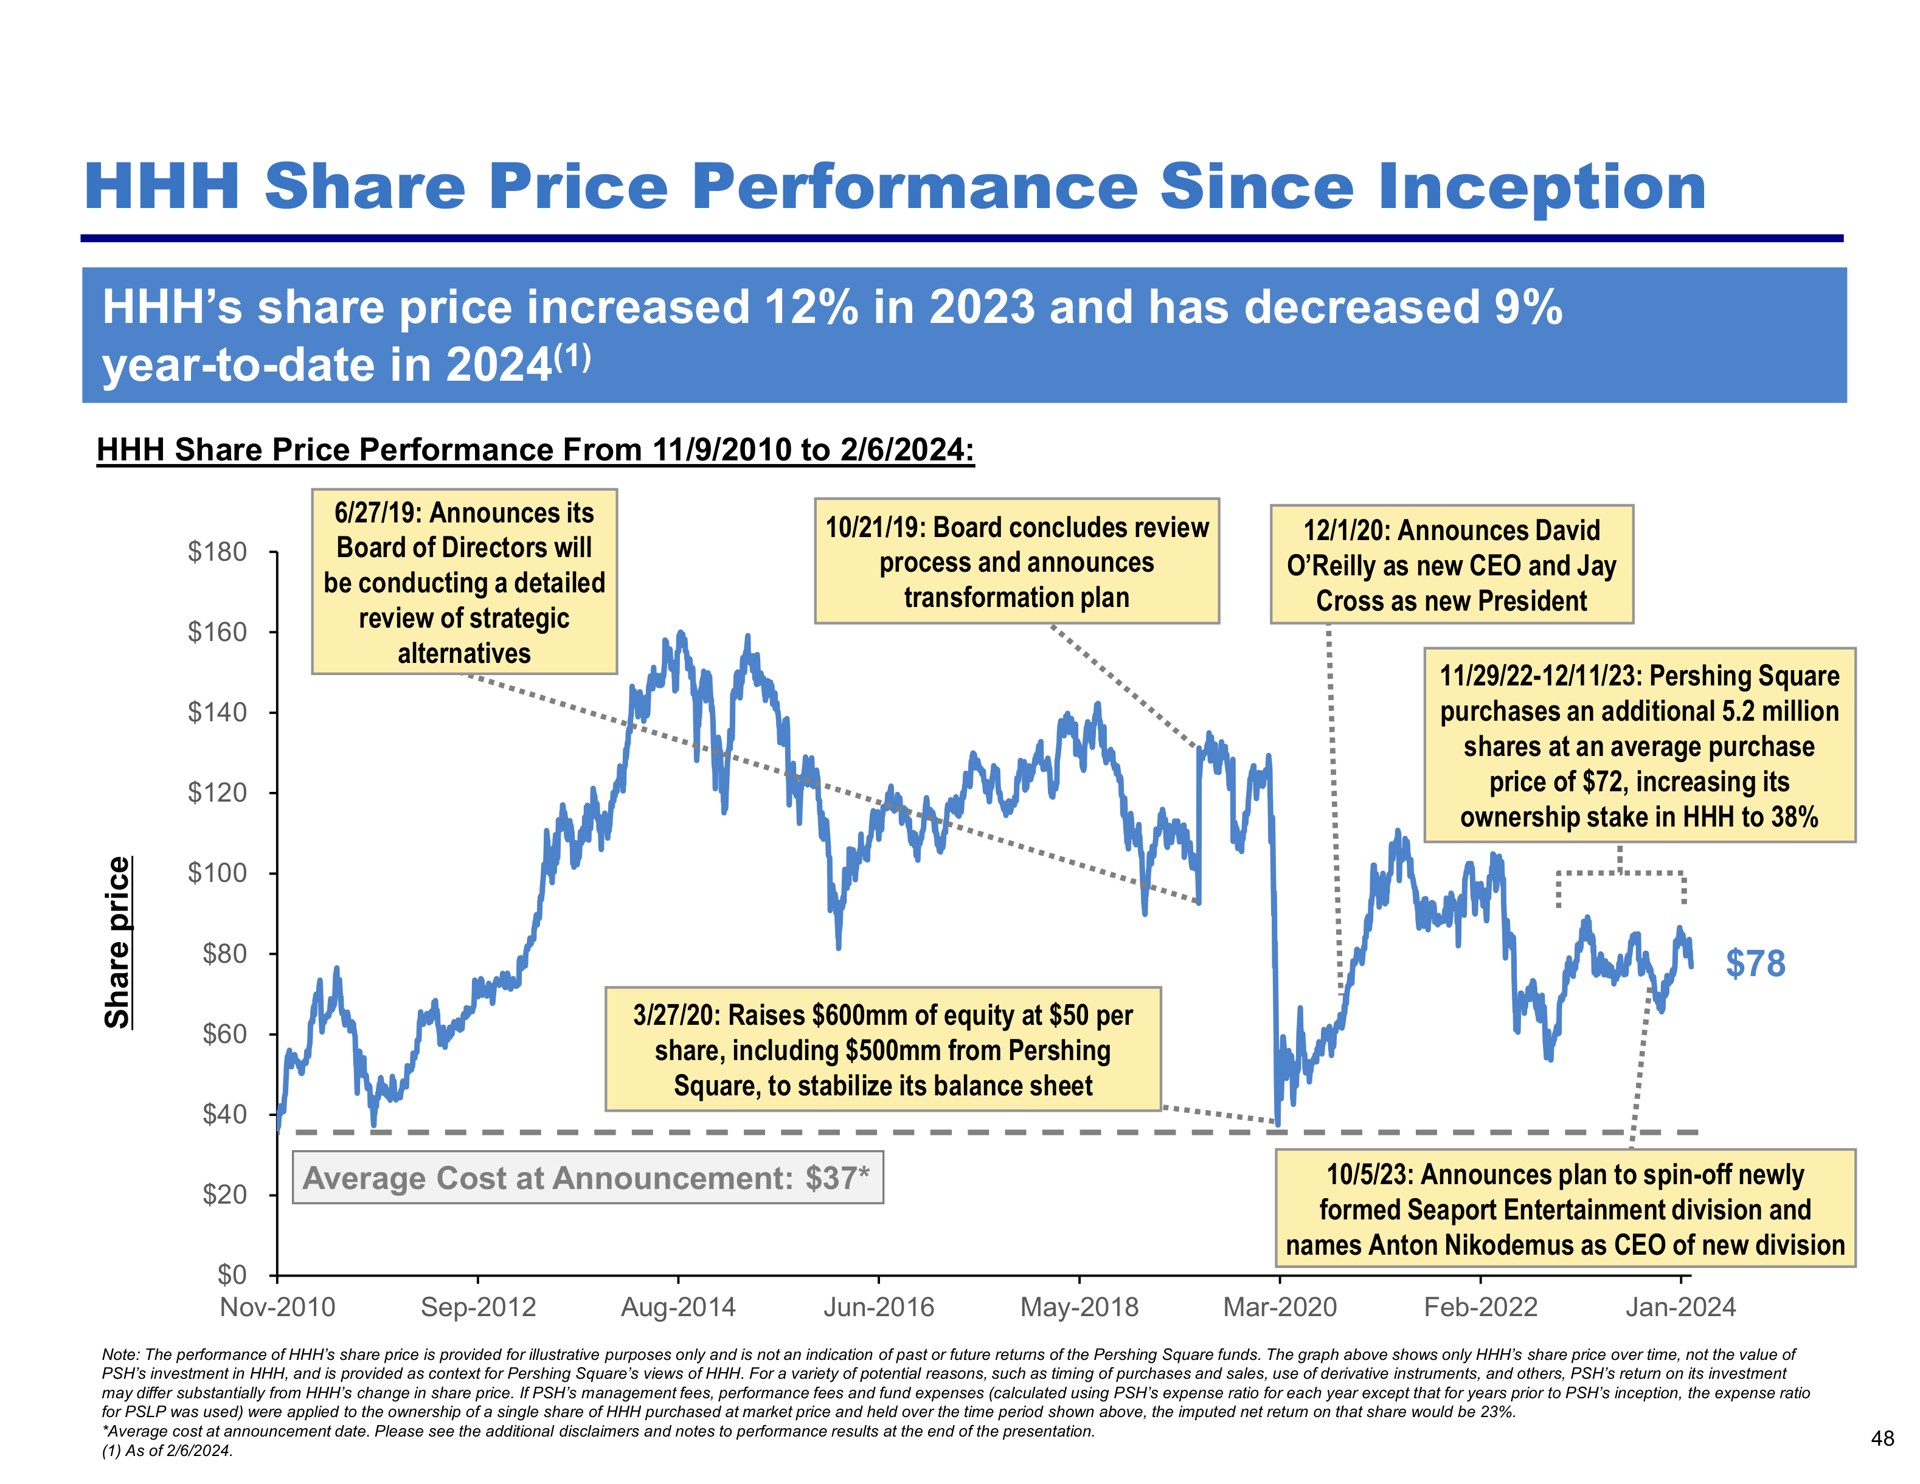 share price performance since inception share price increased in and has decreased year to date in | Pershing Square